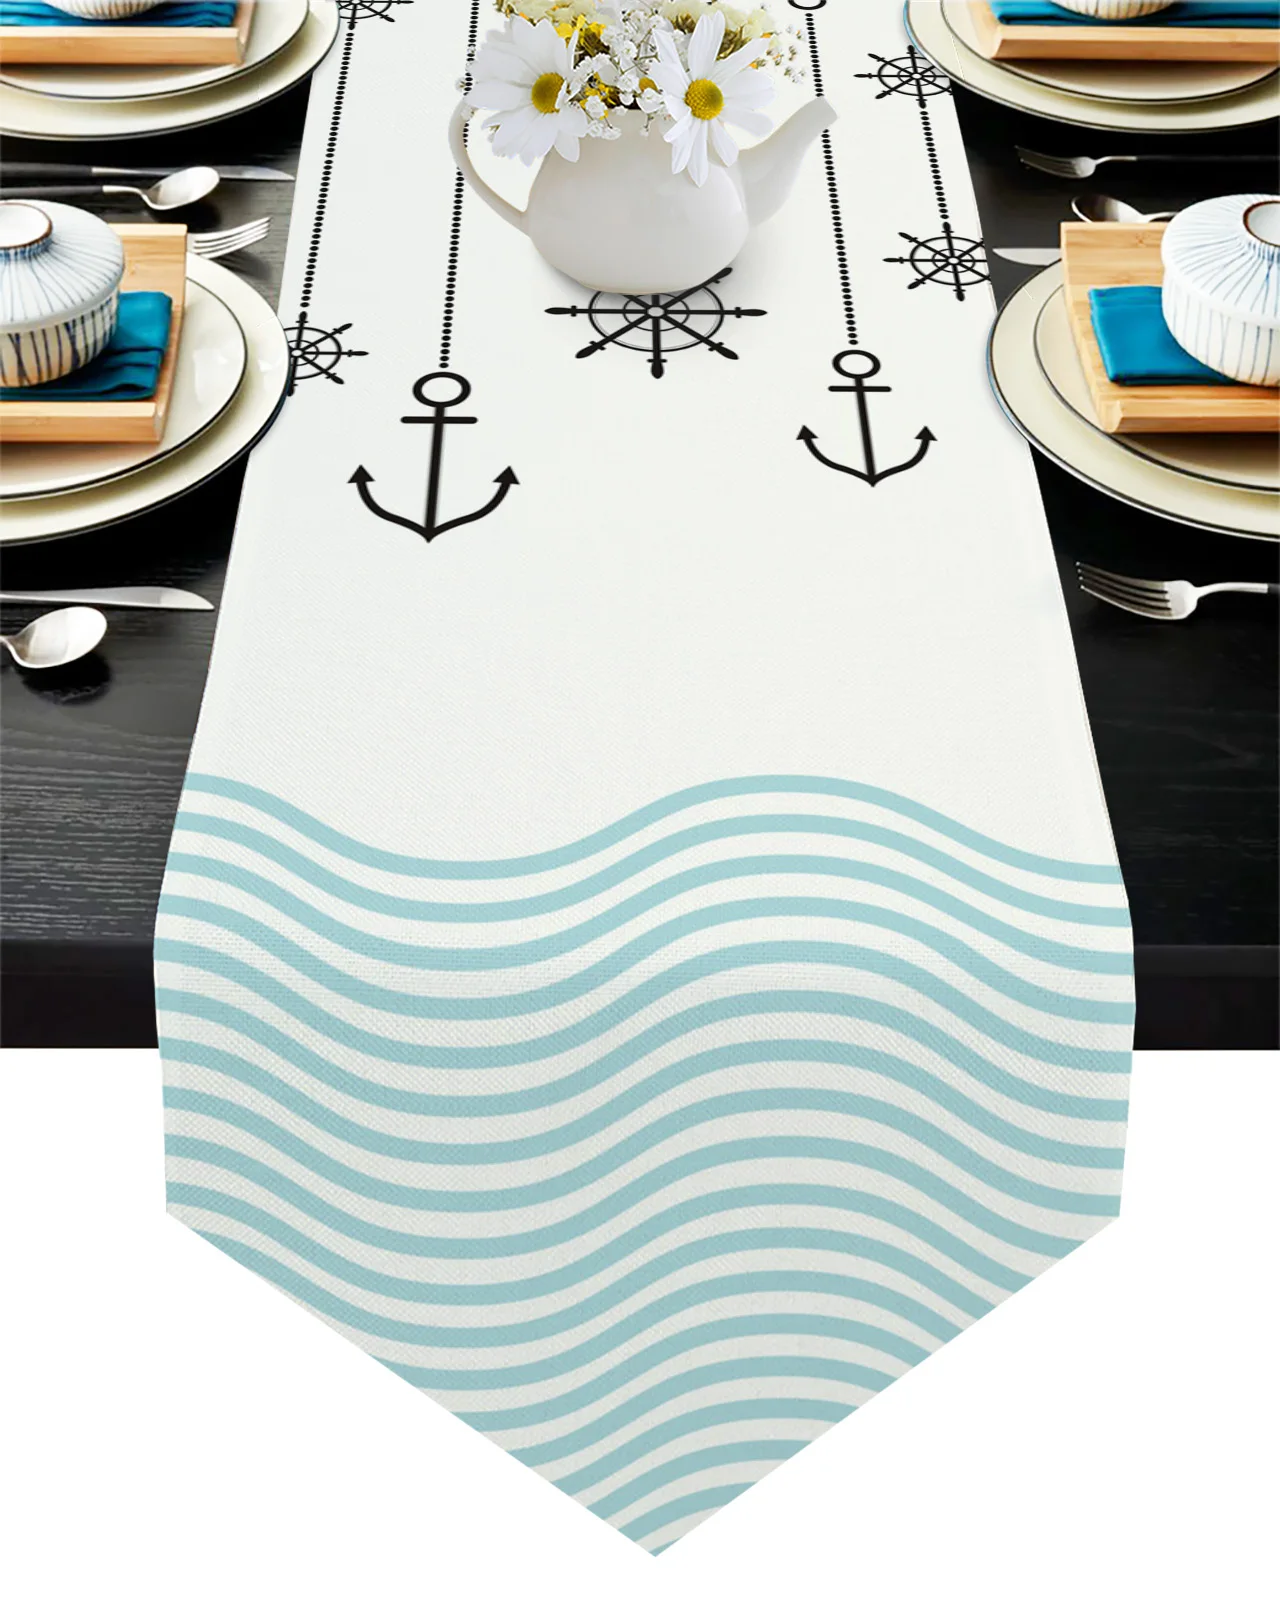 Nautical Motifs Waves Anchors Table Runner Wedding Party Table Decoration  Kitchen Dining Tablecloth Home Decor - AliExpress